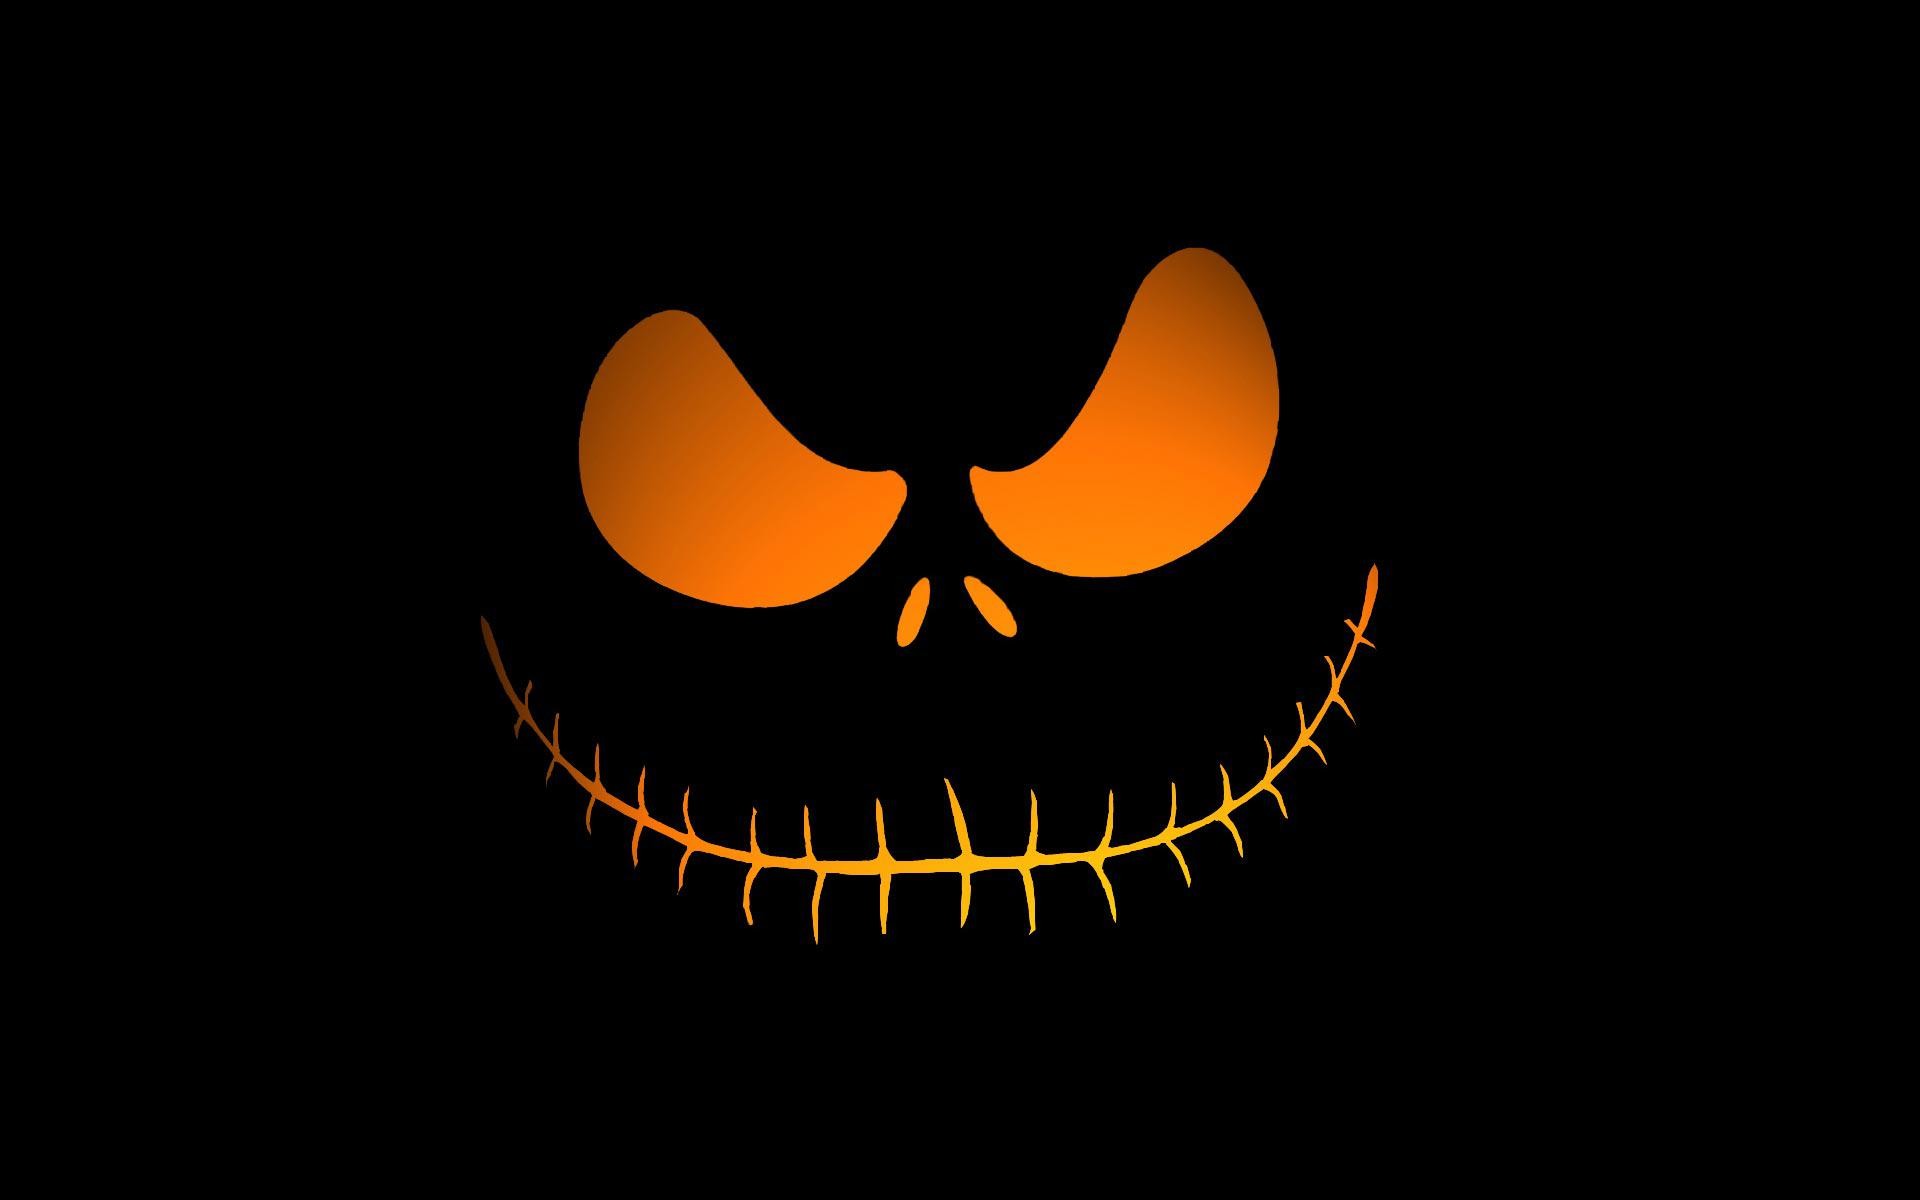 61 Evil Smile Wallpapers on WallpaperPlay